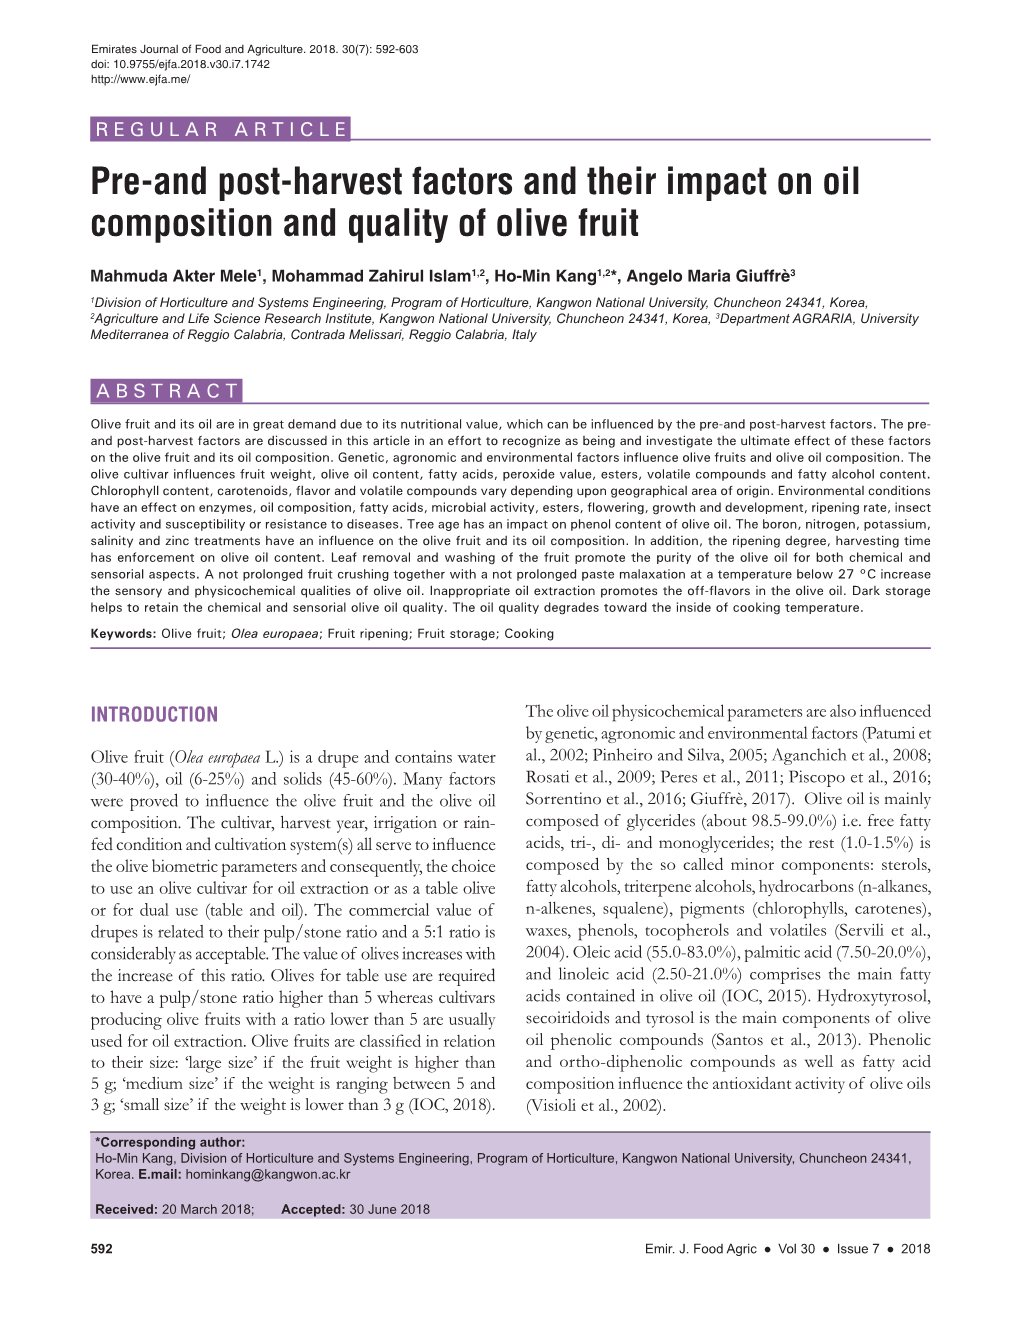 Pre-And Post-Harvest Factors and Their Impact on Oil Composition and Quality of Olive Fruit